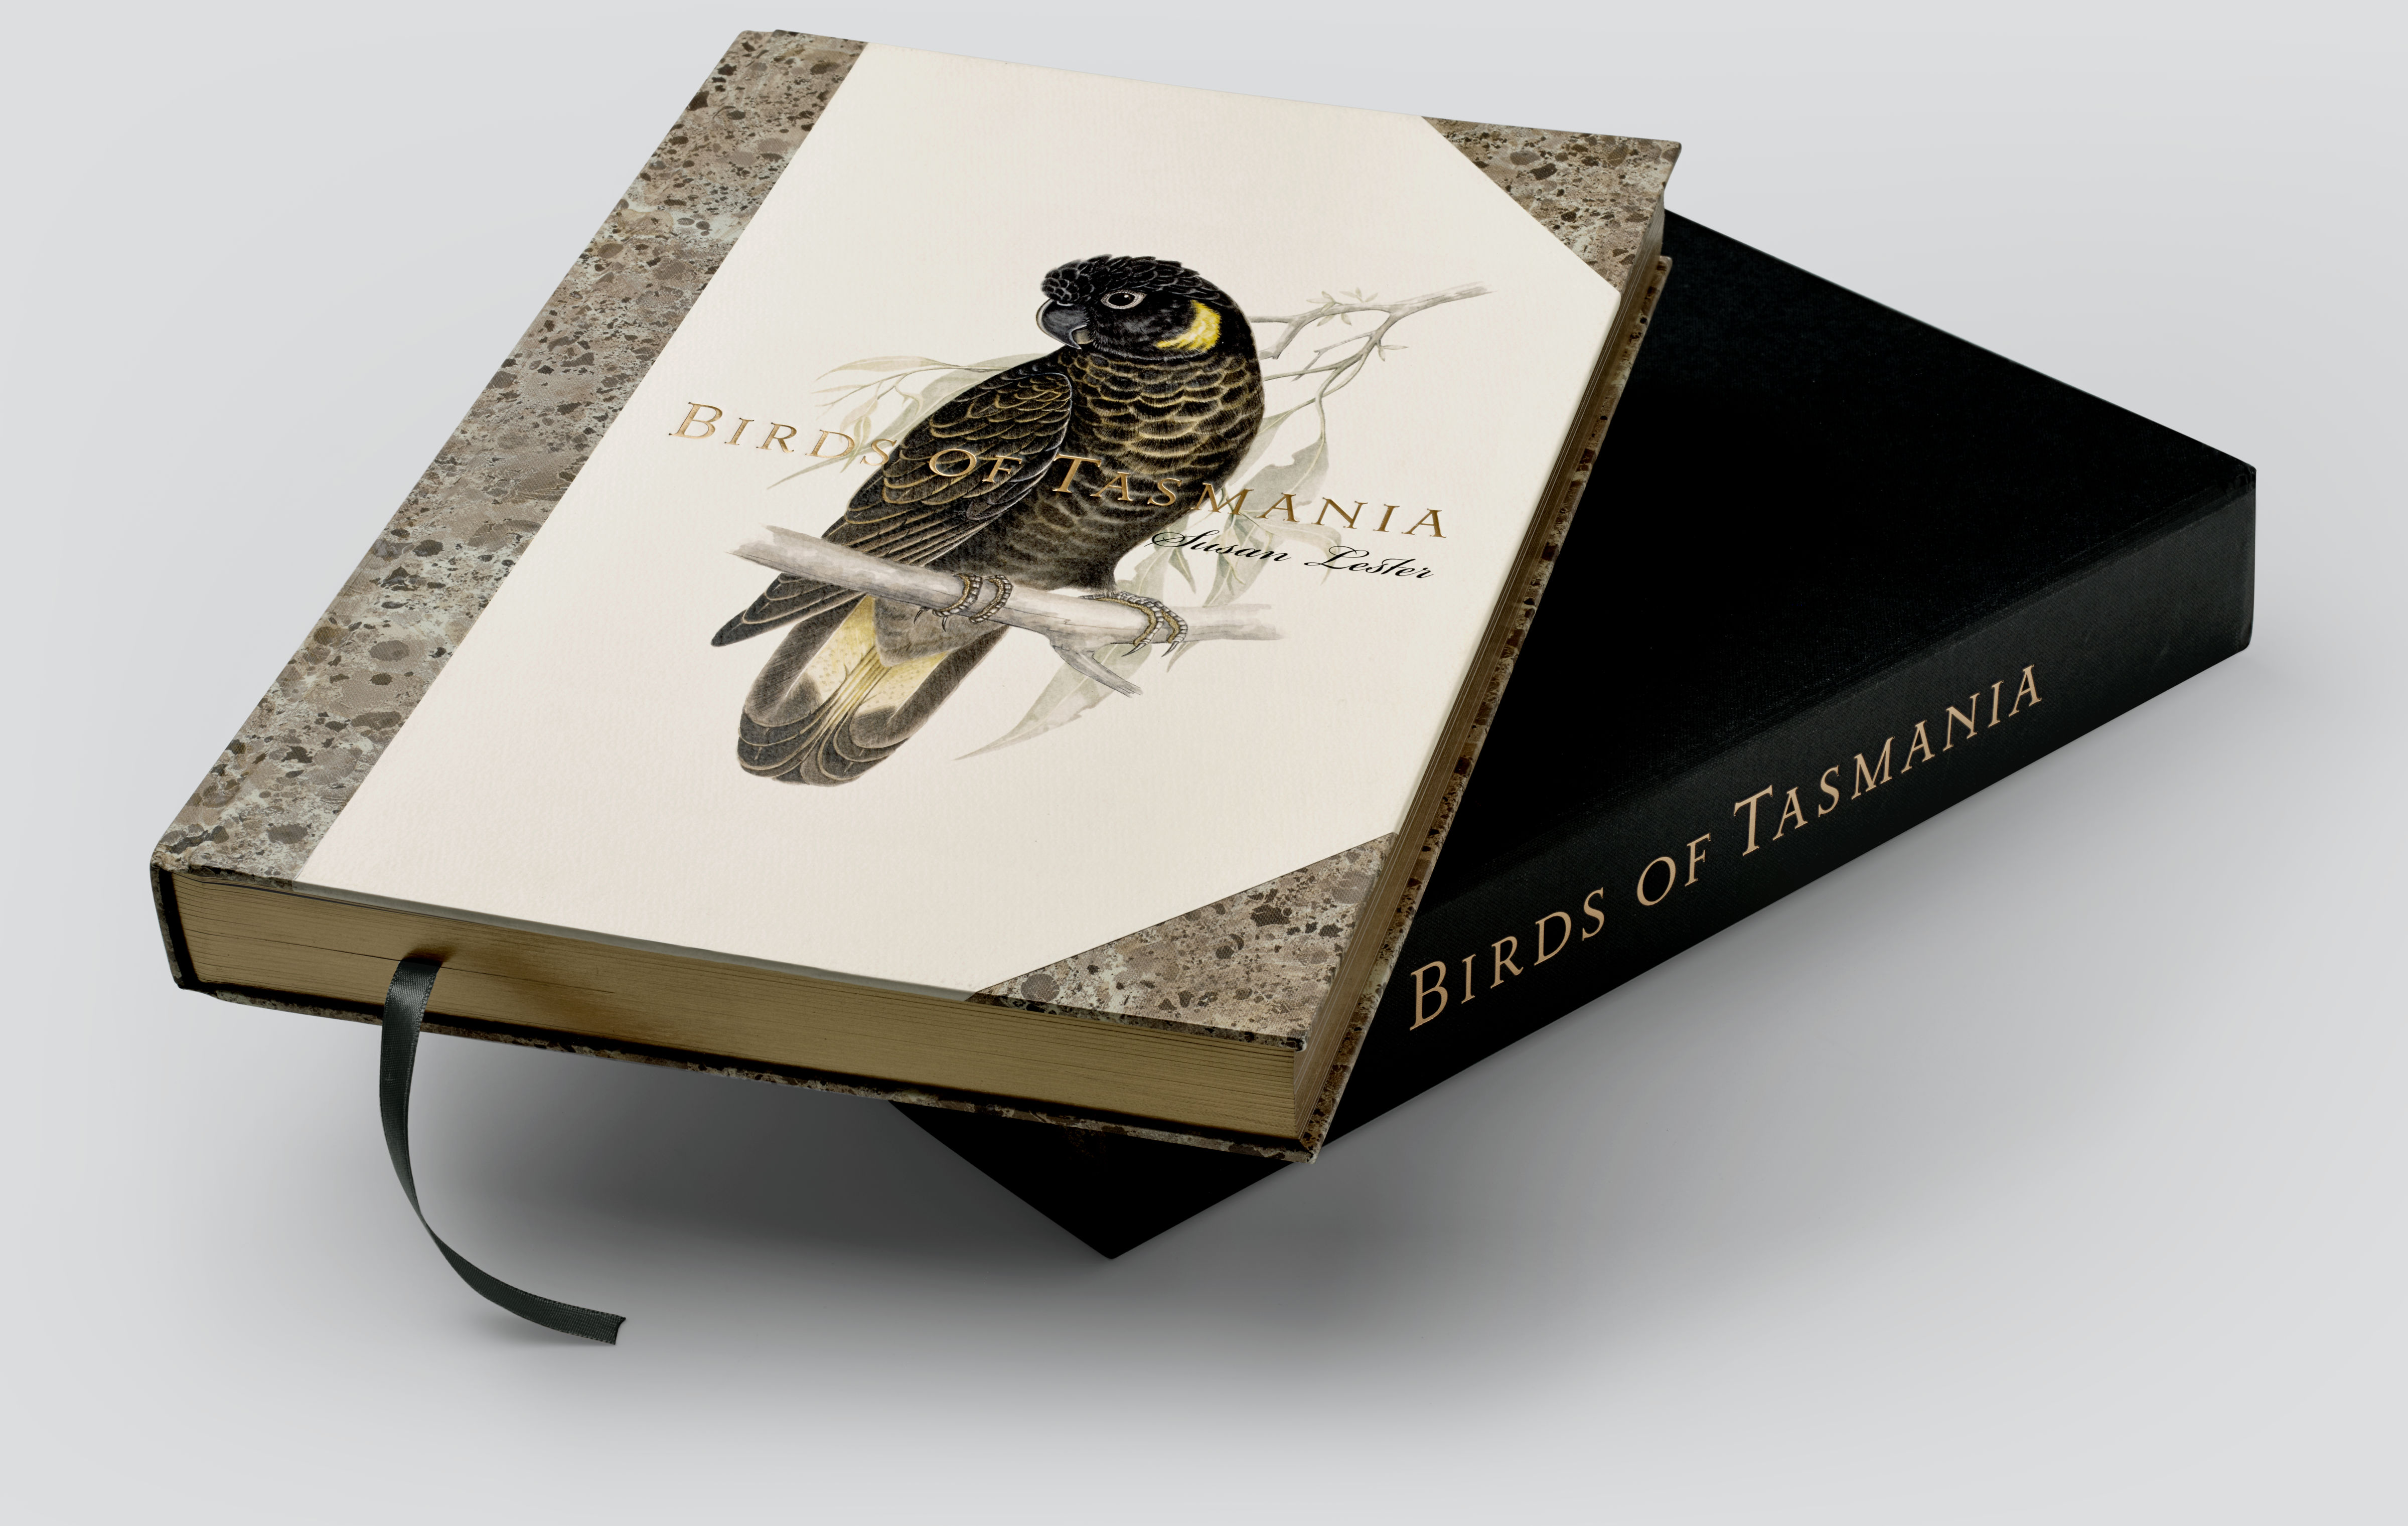 The ‘Birds of Tasmania’ by Susan Lester book, with a Yellow-tailed Cockatoo image and gold and black foil titling, sitting on the black clamshell presentation box.